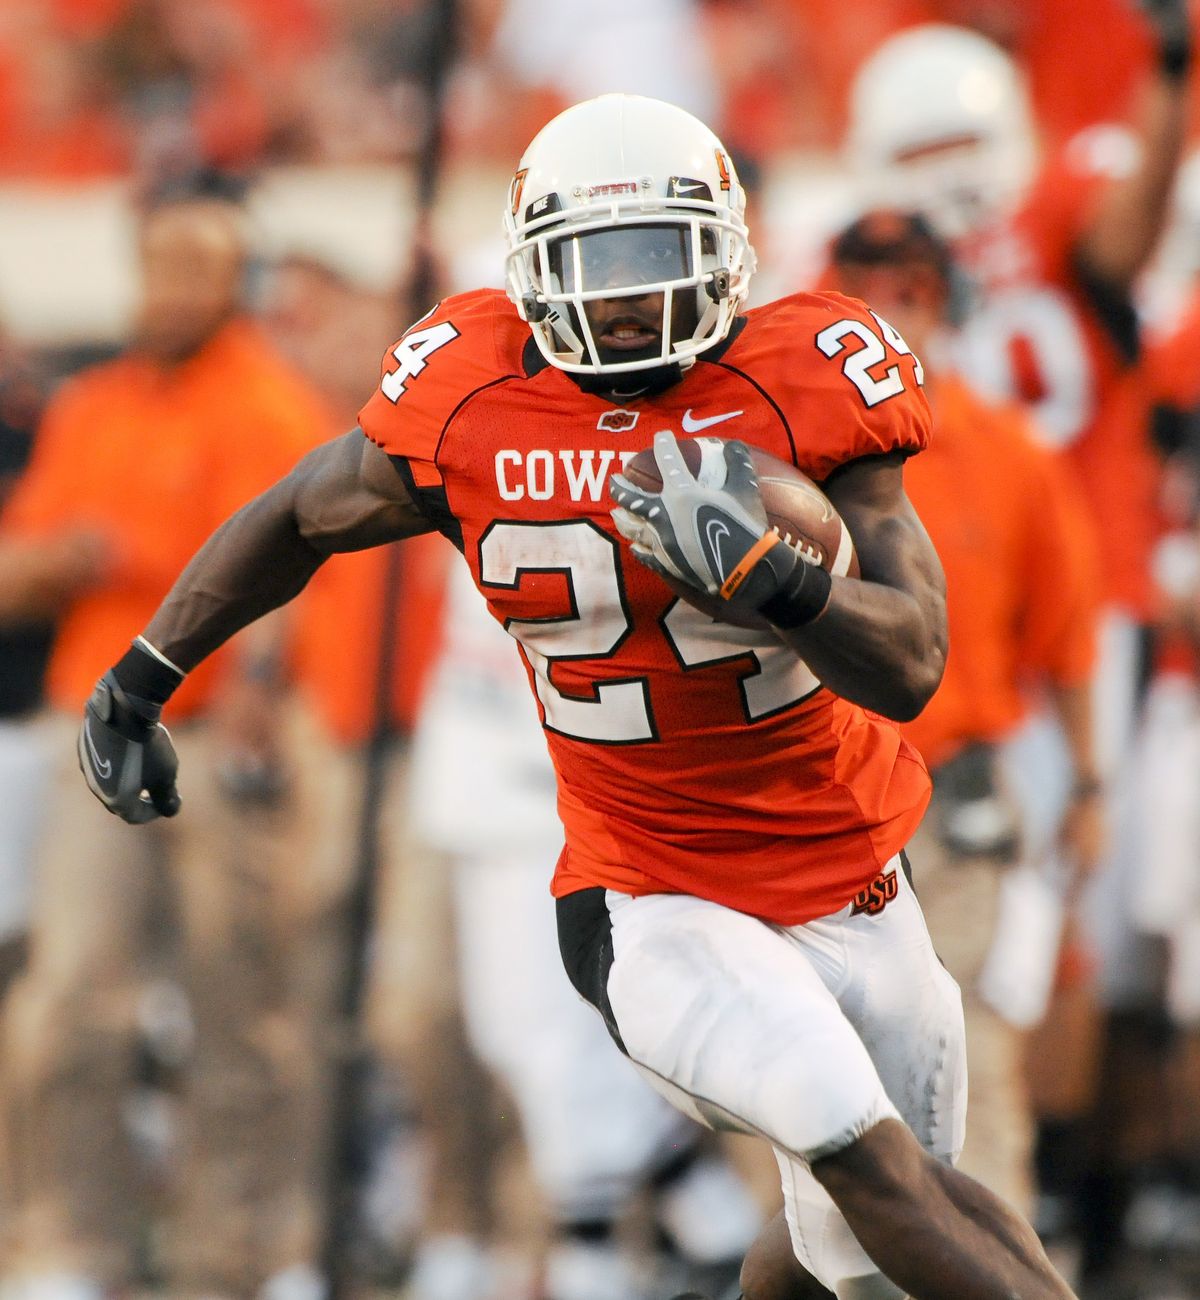 Oklahoma State running back Kendall Hunter breaks away for a 66-yard run during the first half of an NCAA college football game against Washington State in Stillwater, Okla.. Saturday, Sept. 04, 2010. (Brody Schmidt / Fr79308 Ap)